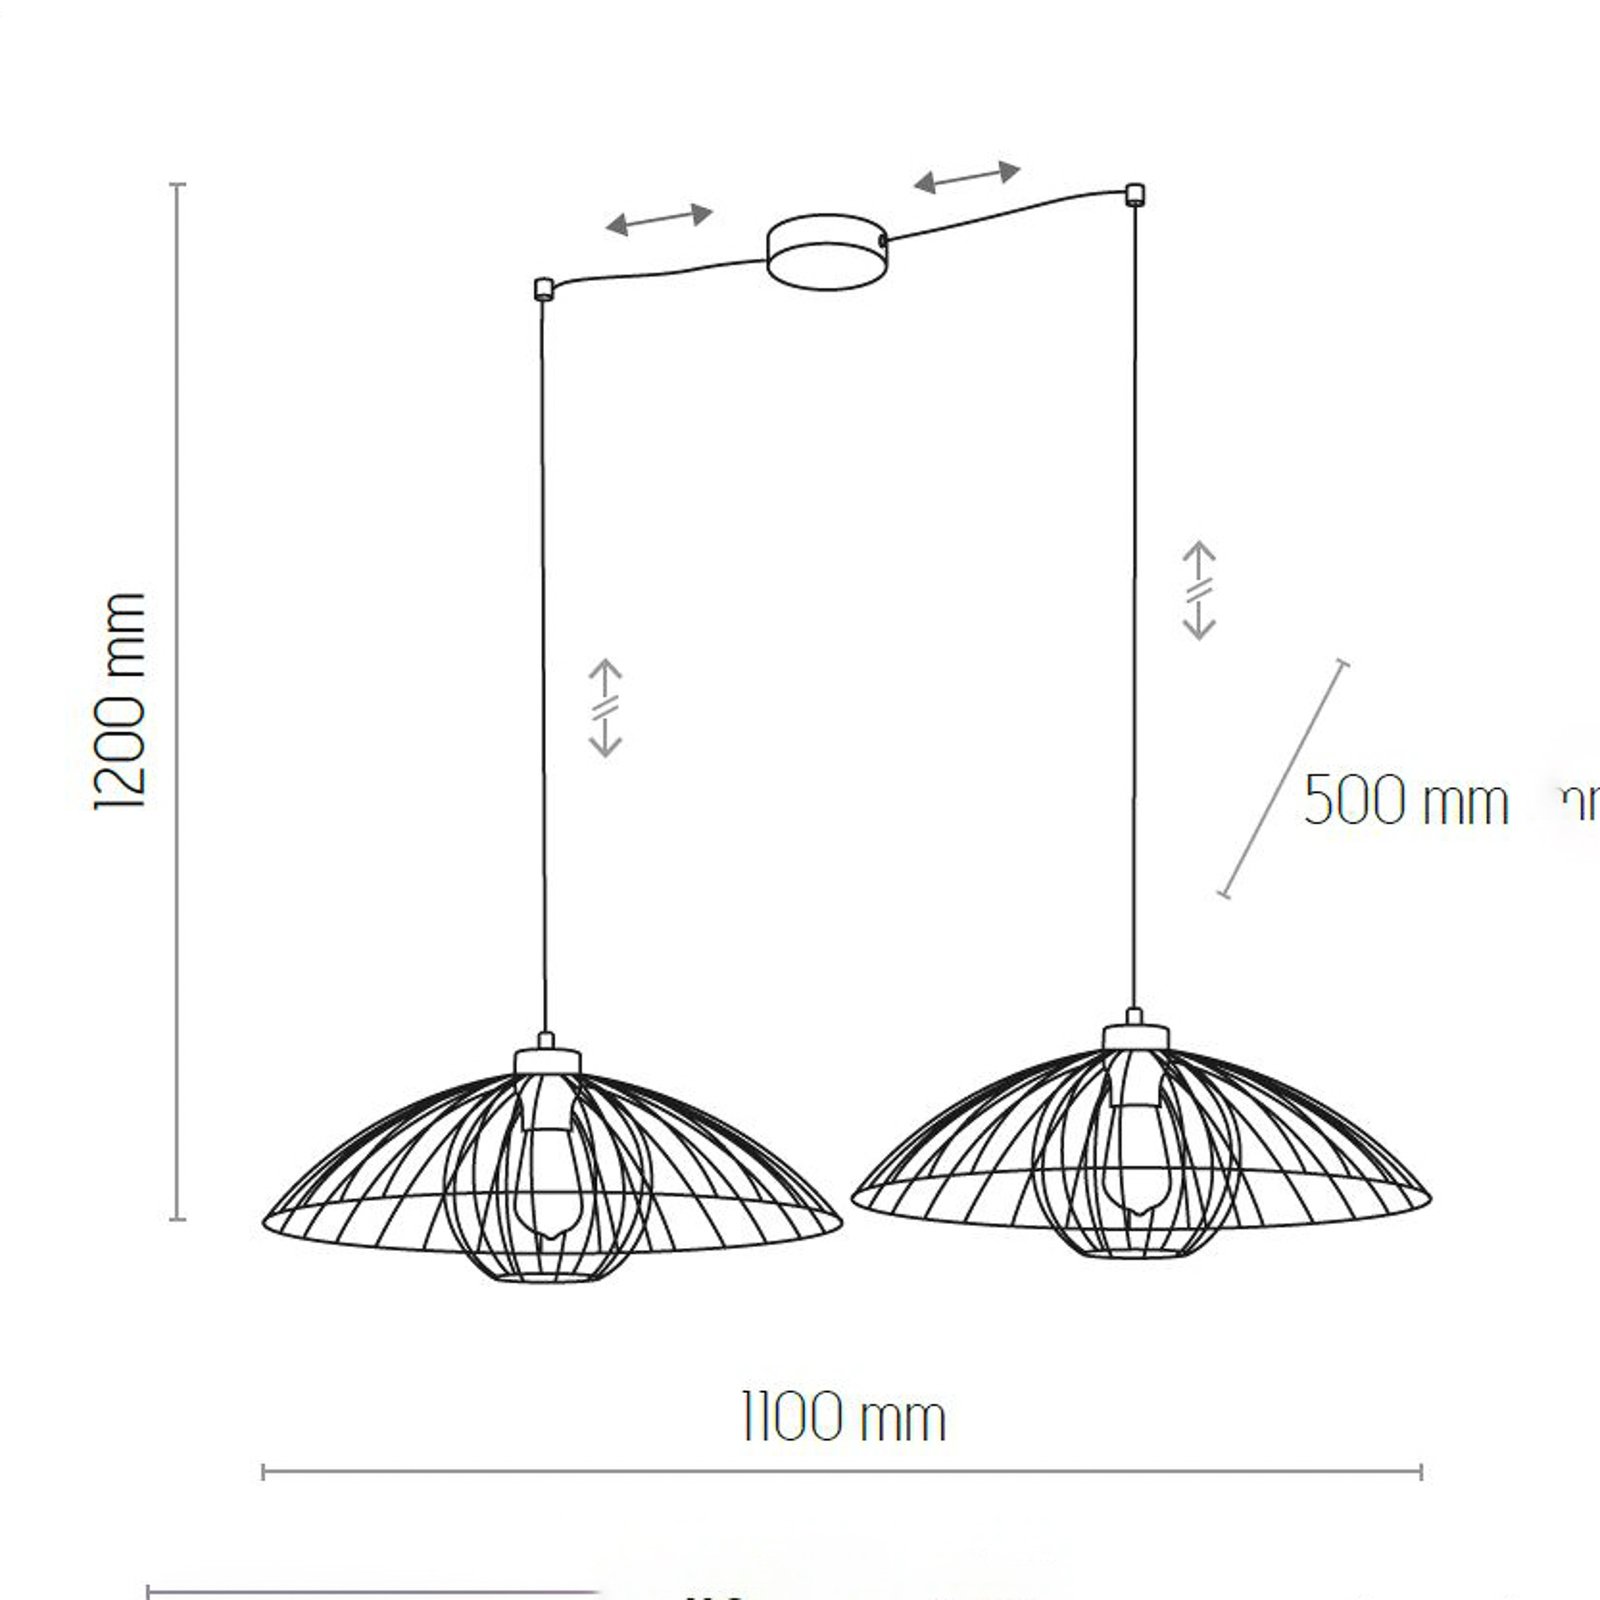 Barbella hanging light, cage lampshade, two-bulb